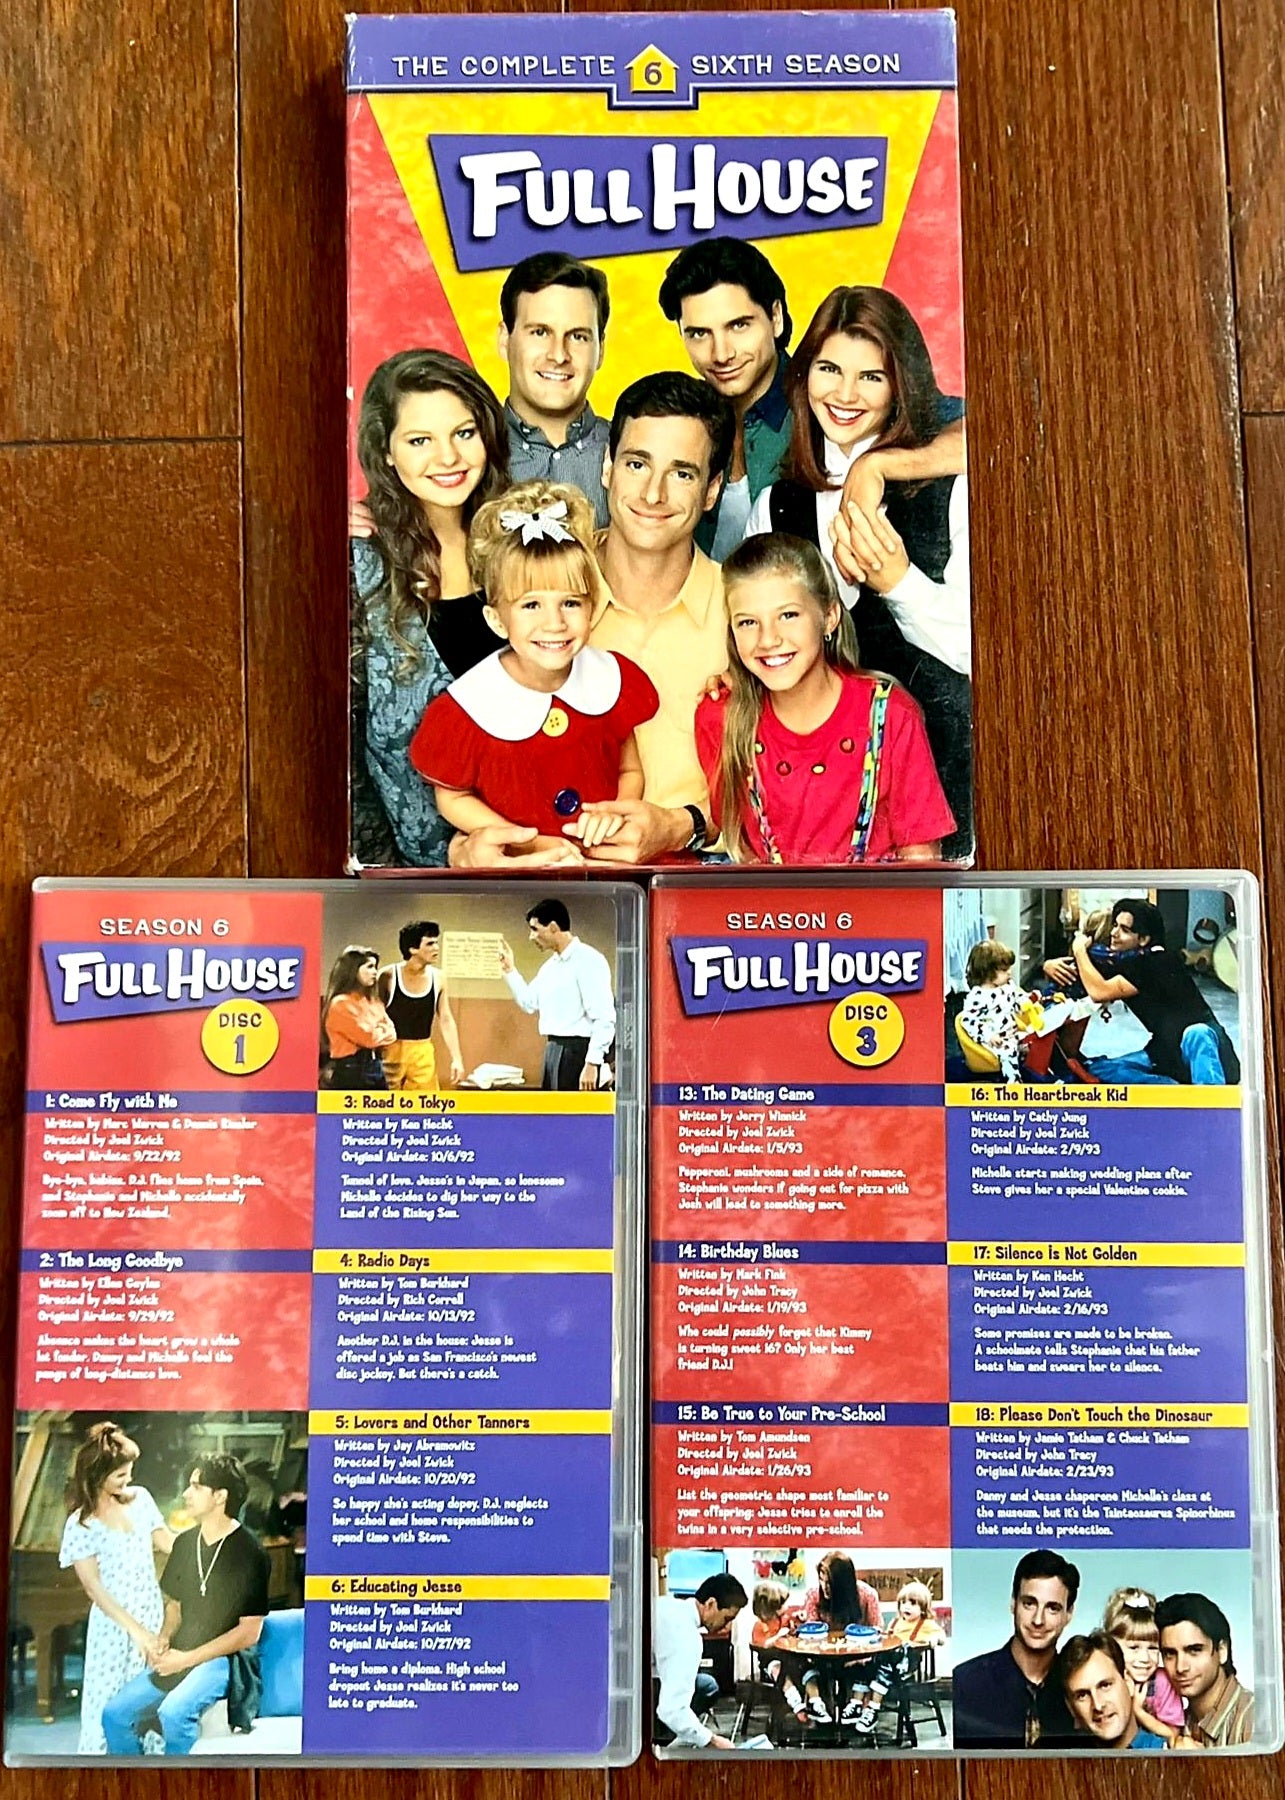 'FULL HOUSE' *The Complete Seasons 3, 4, 6 on DVD